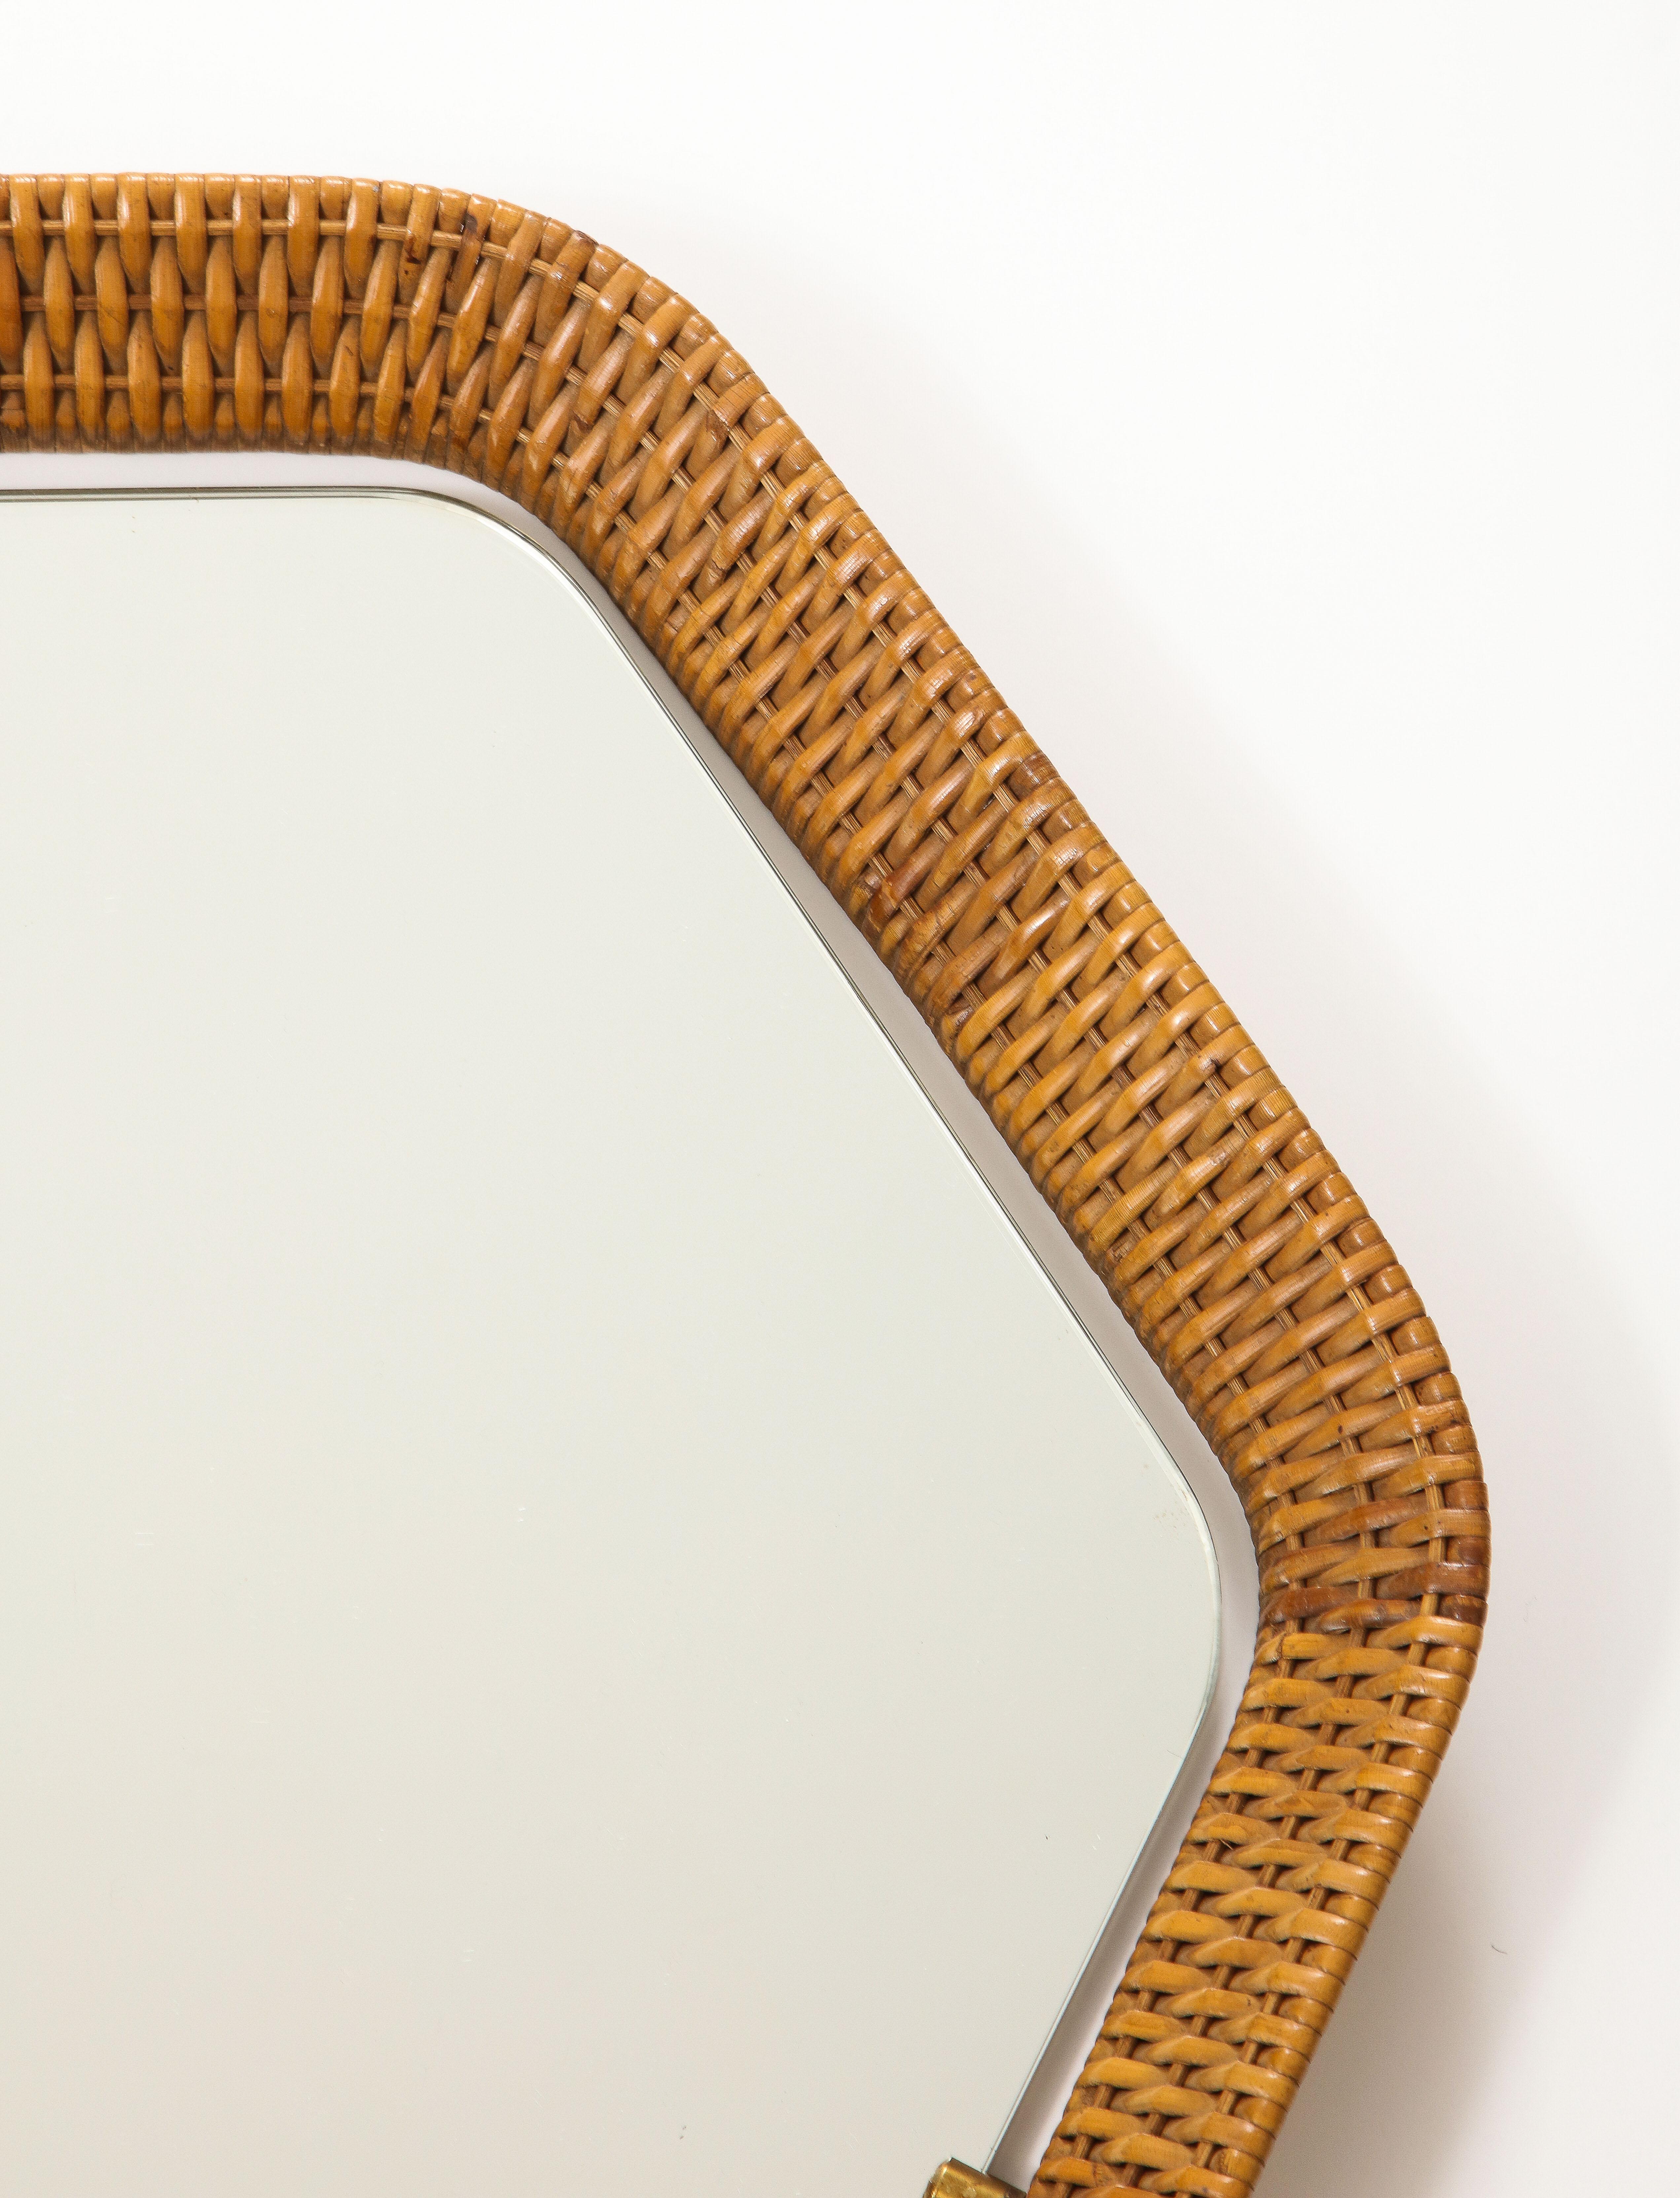 Italian Rattan and Brass Hexagon Shaped Mirror by Cantu, 1950s For Sale 3